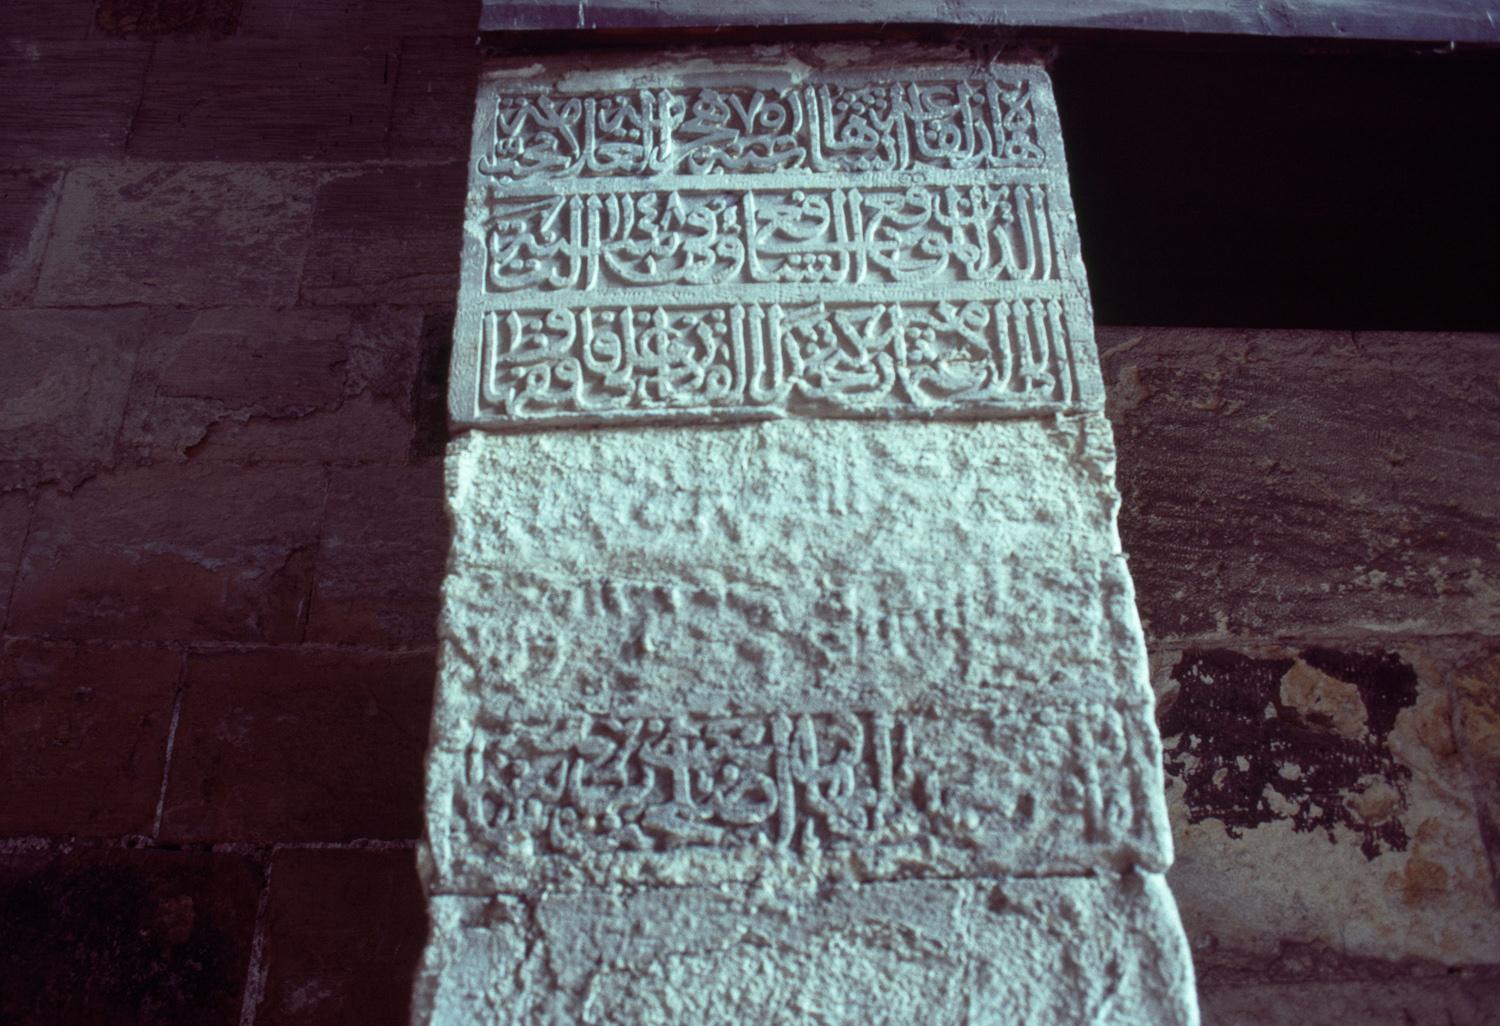 Inscription for central hall (durqa'a), dated 1148 A.H.